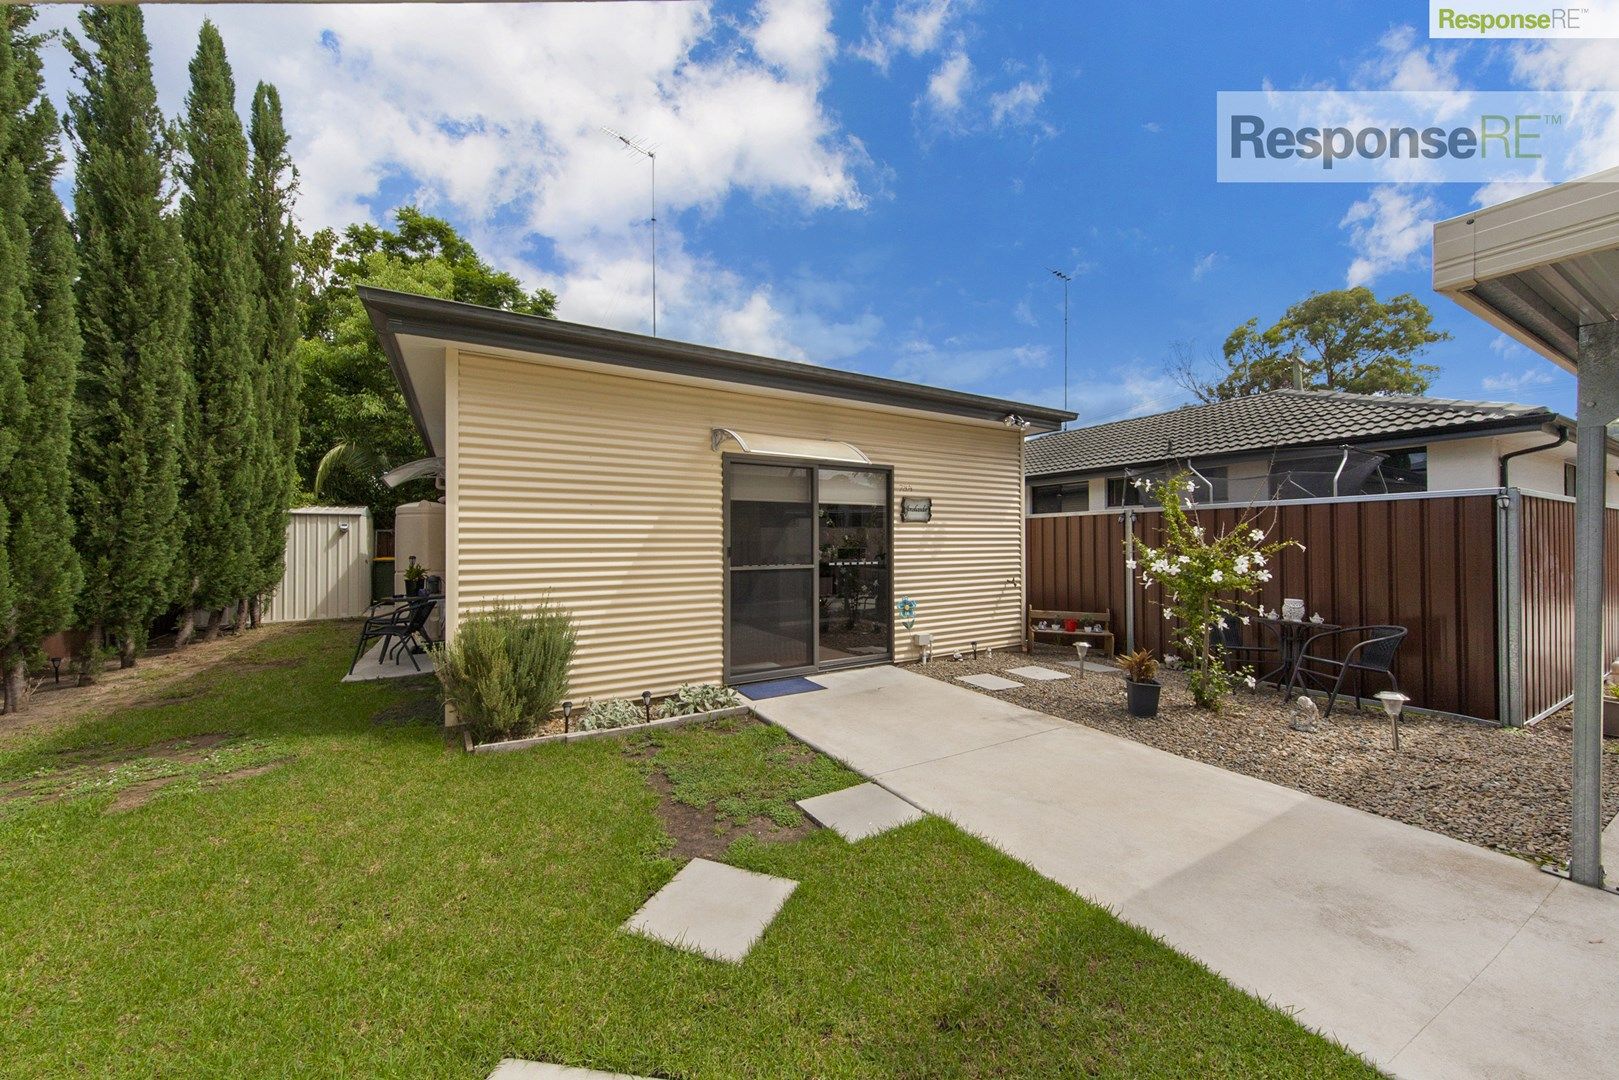 2 bedrooms Semi-Detached in 78a Russell Street EMU PLAINS NSW, 2750